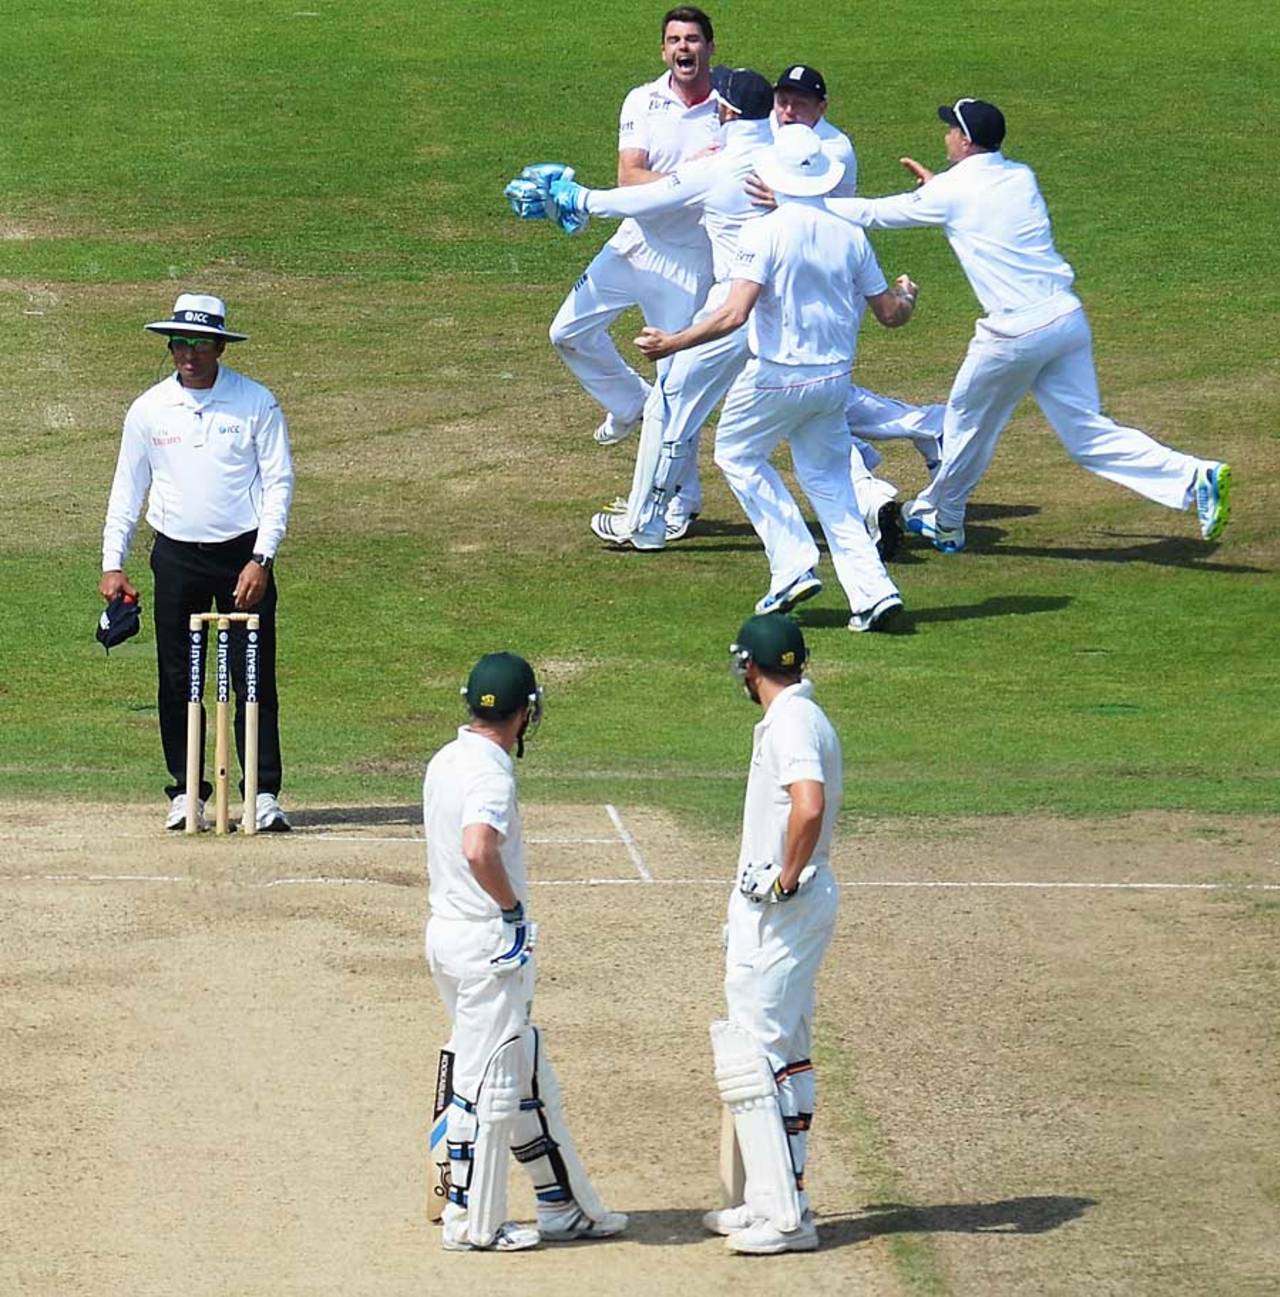 Arguably Aleem Dar made the right call on the ball that eventually resulted in the Haddin dismissal&nbsp;&nbsp;&bull;&nbsp;&nbsp;Getty Images